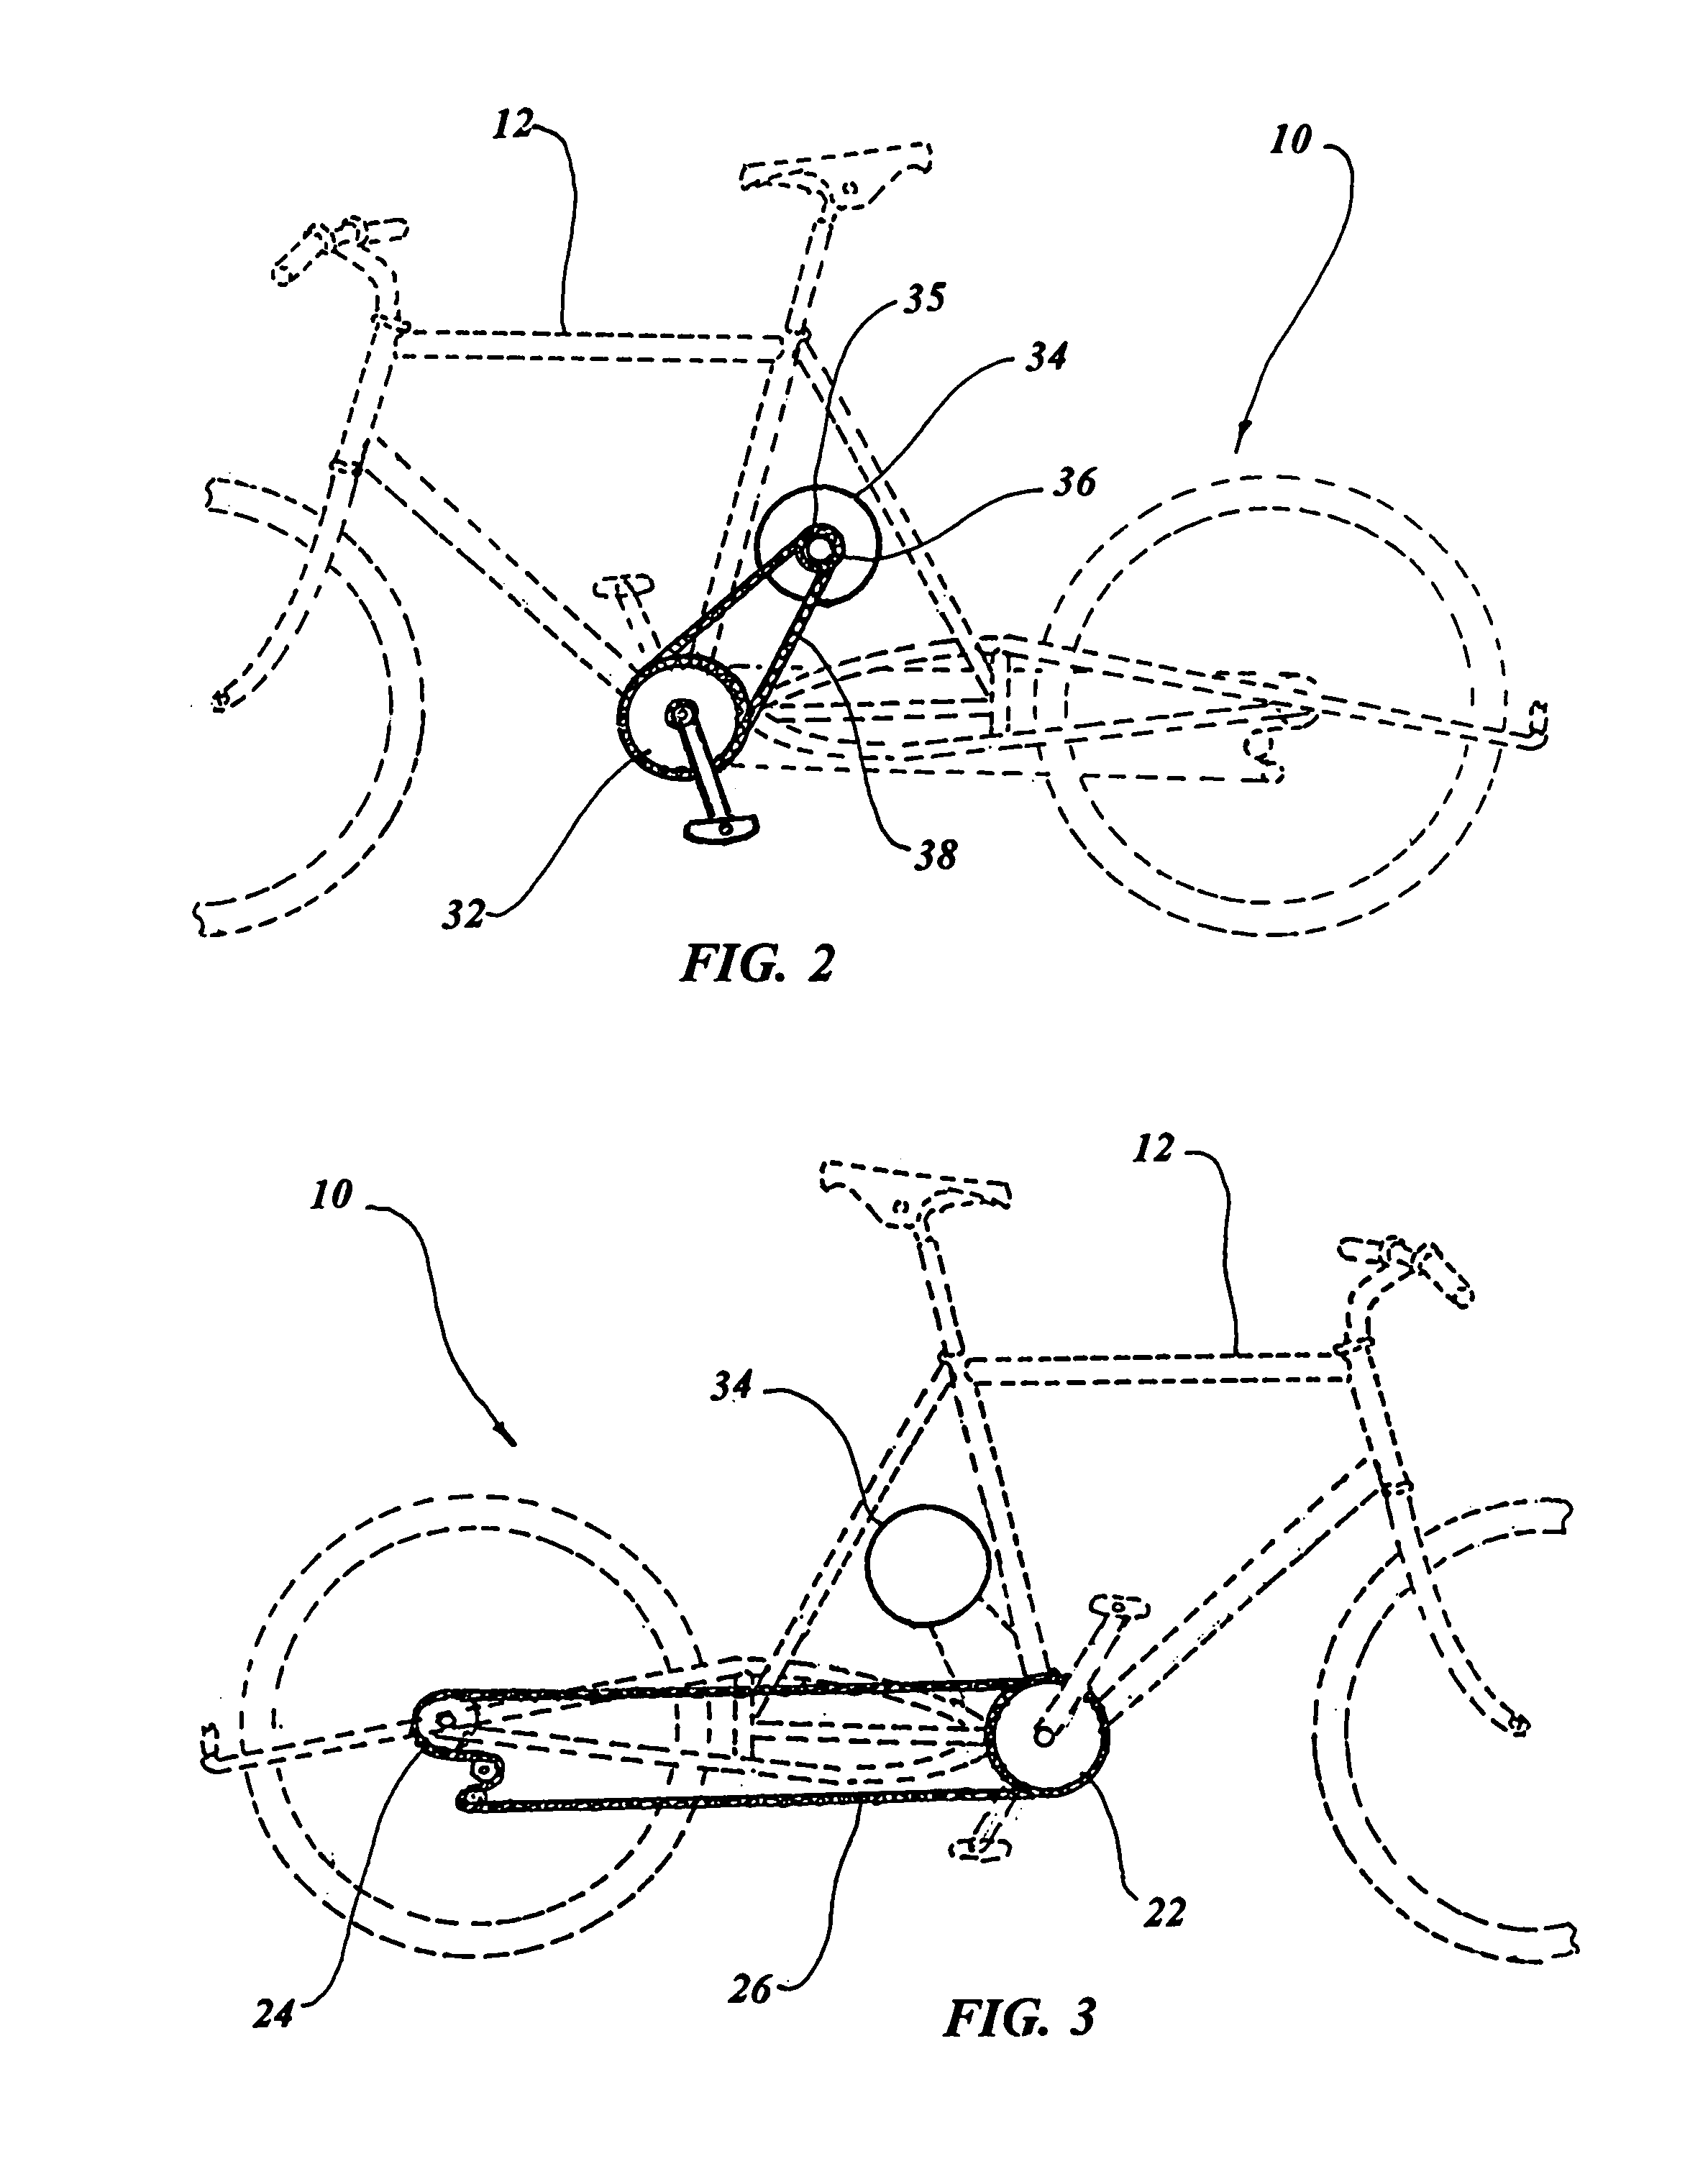 Power assisted bicycle